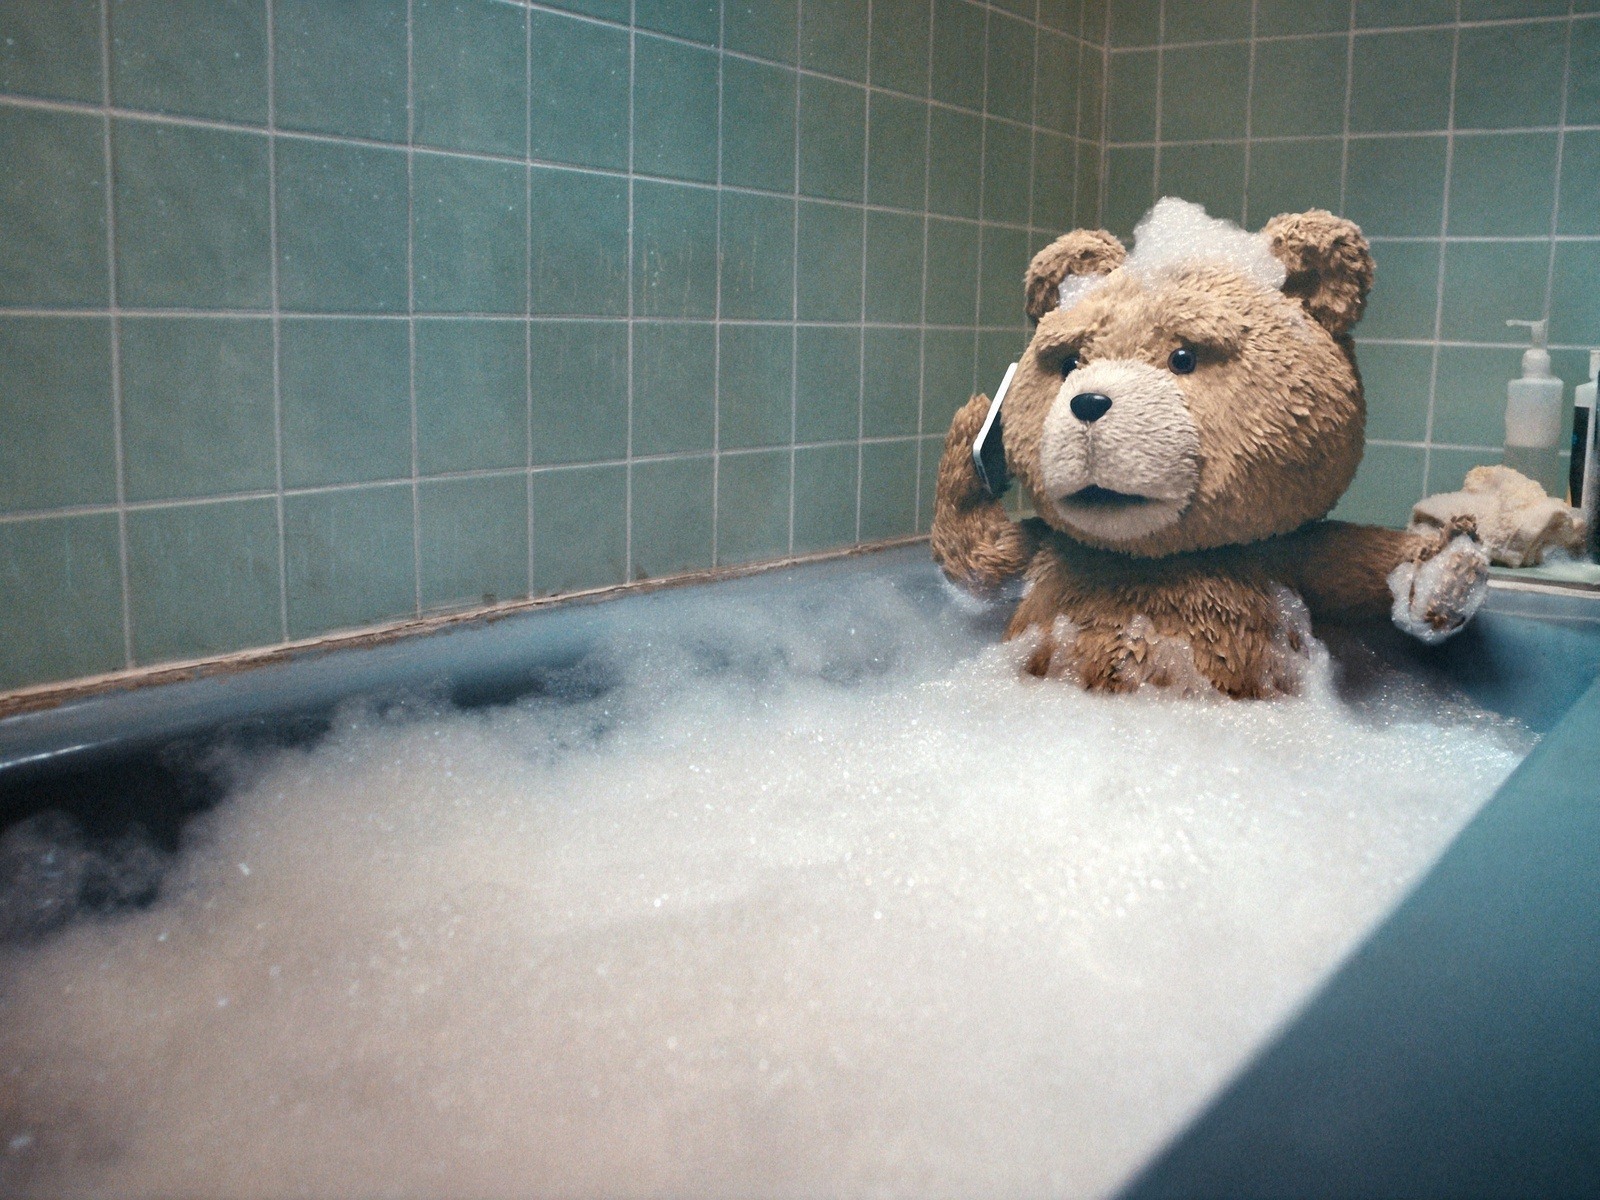 Ted 2012 HD movie wallpapers #2 - 1600x1200